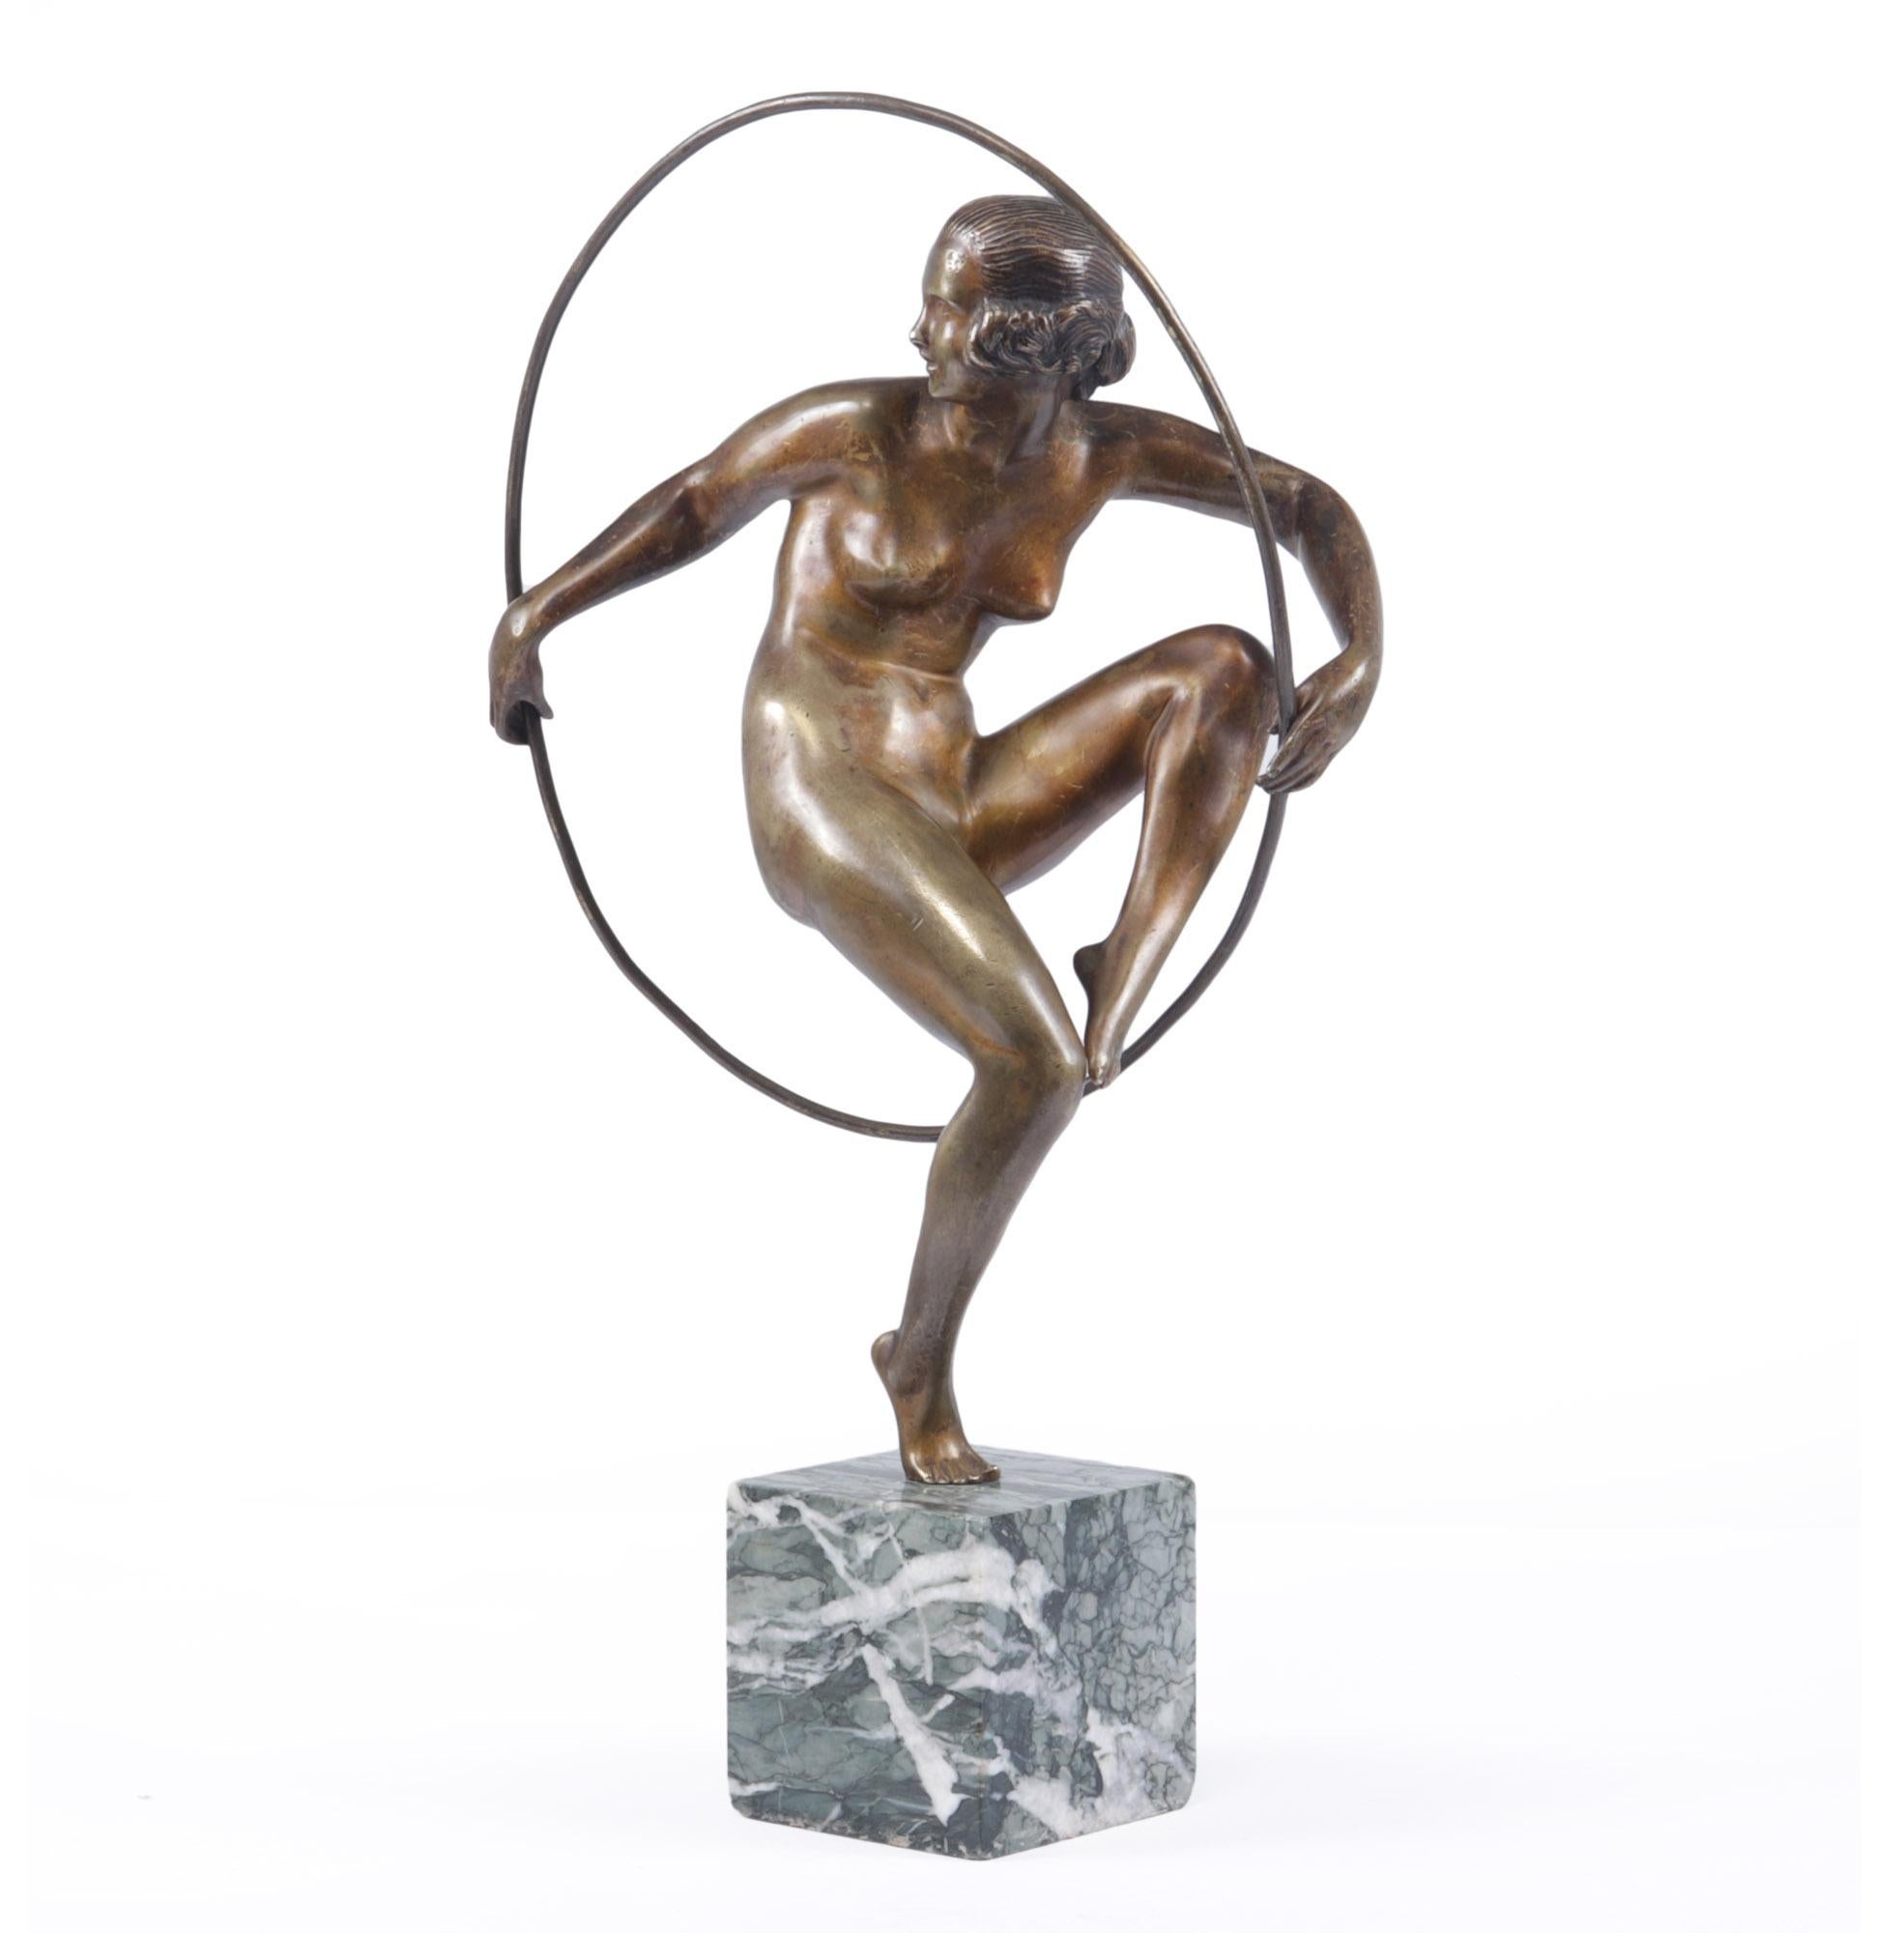 Art Deco bronze sculpture hoop dancer by A Bouraine c1920
An unsigned French art deco bronze hoop dancer by Marcel Bouraine with lovely patina standing on a green marble base, there are a few age related marks but overall in very good